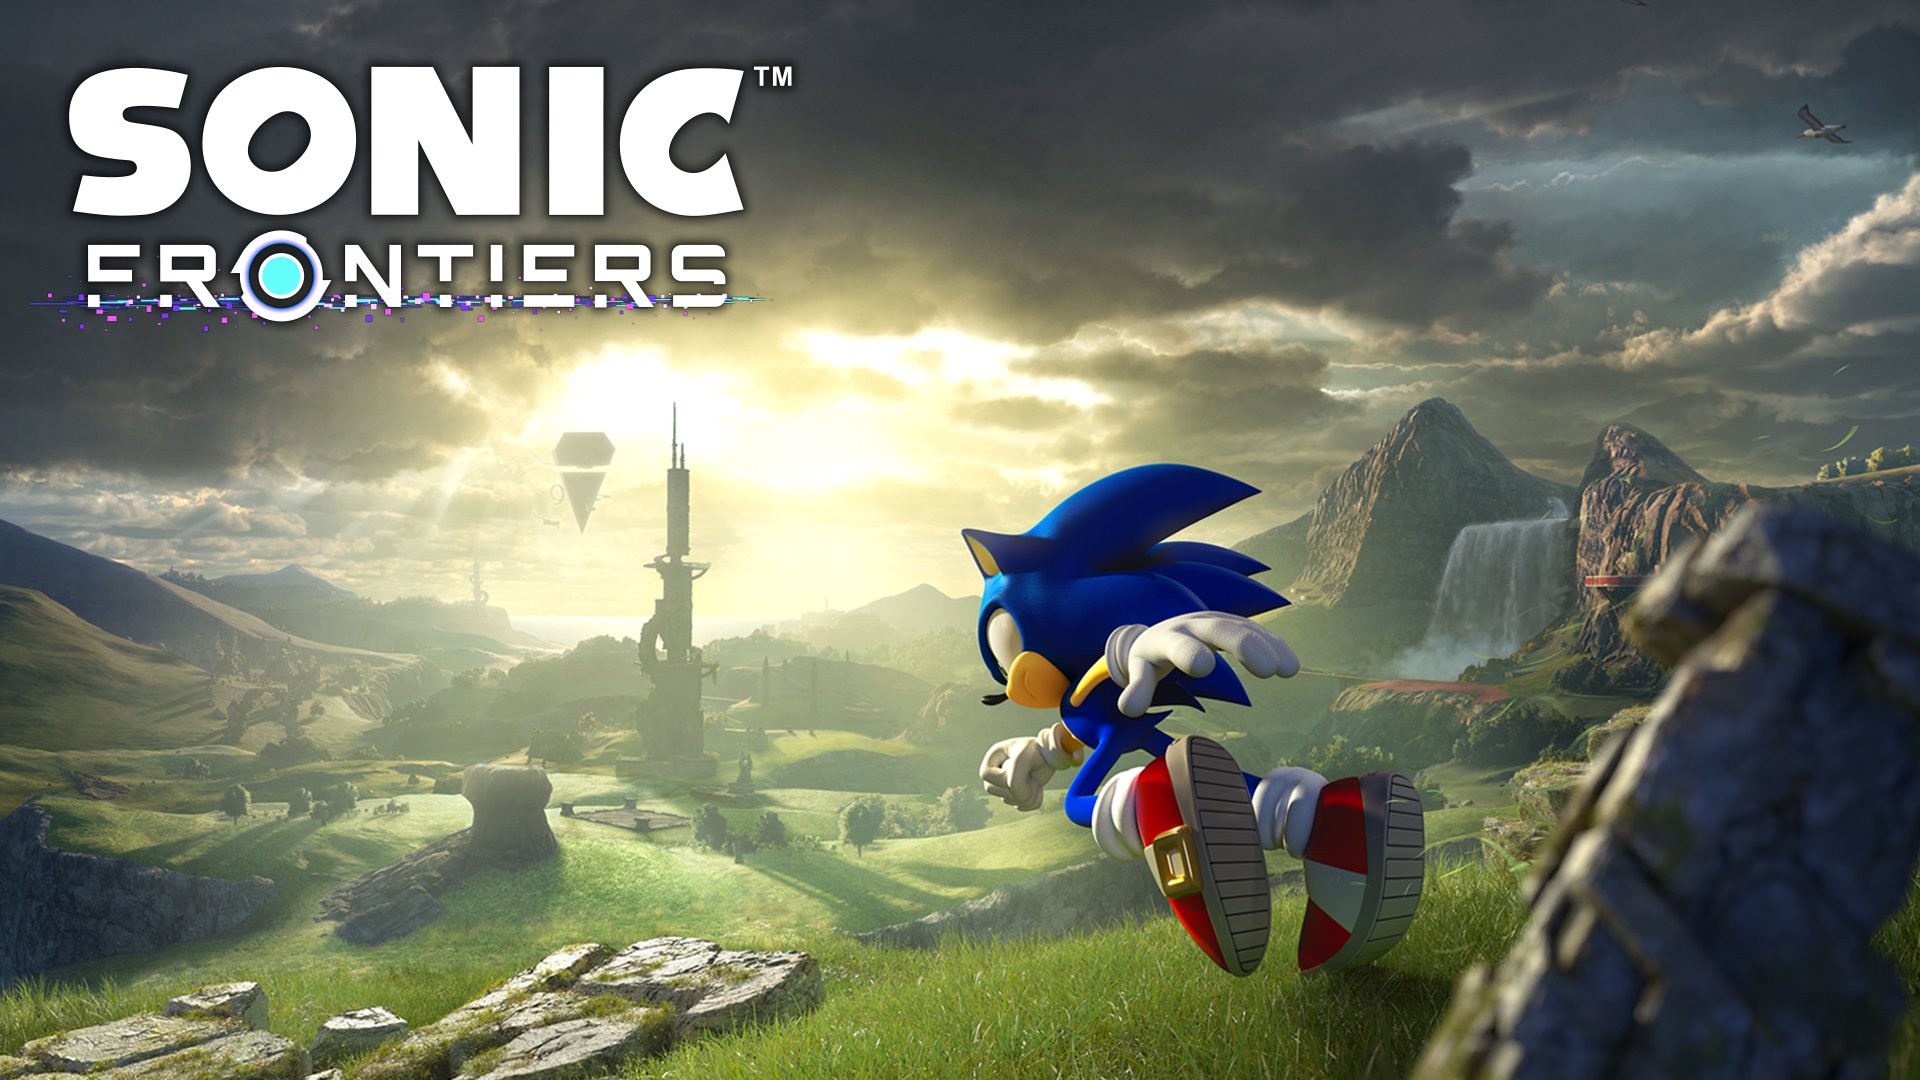 Sonic Frontiers' first big free DLC is coming this week